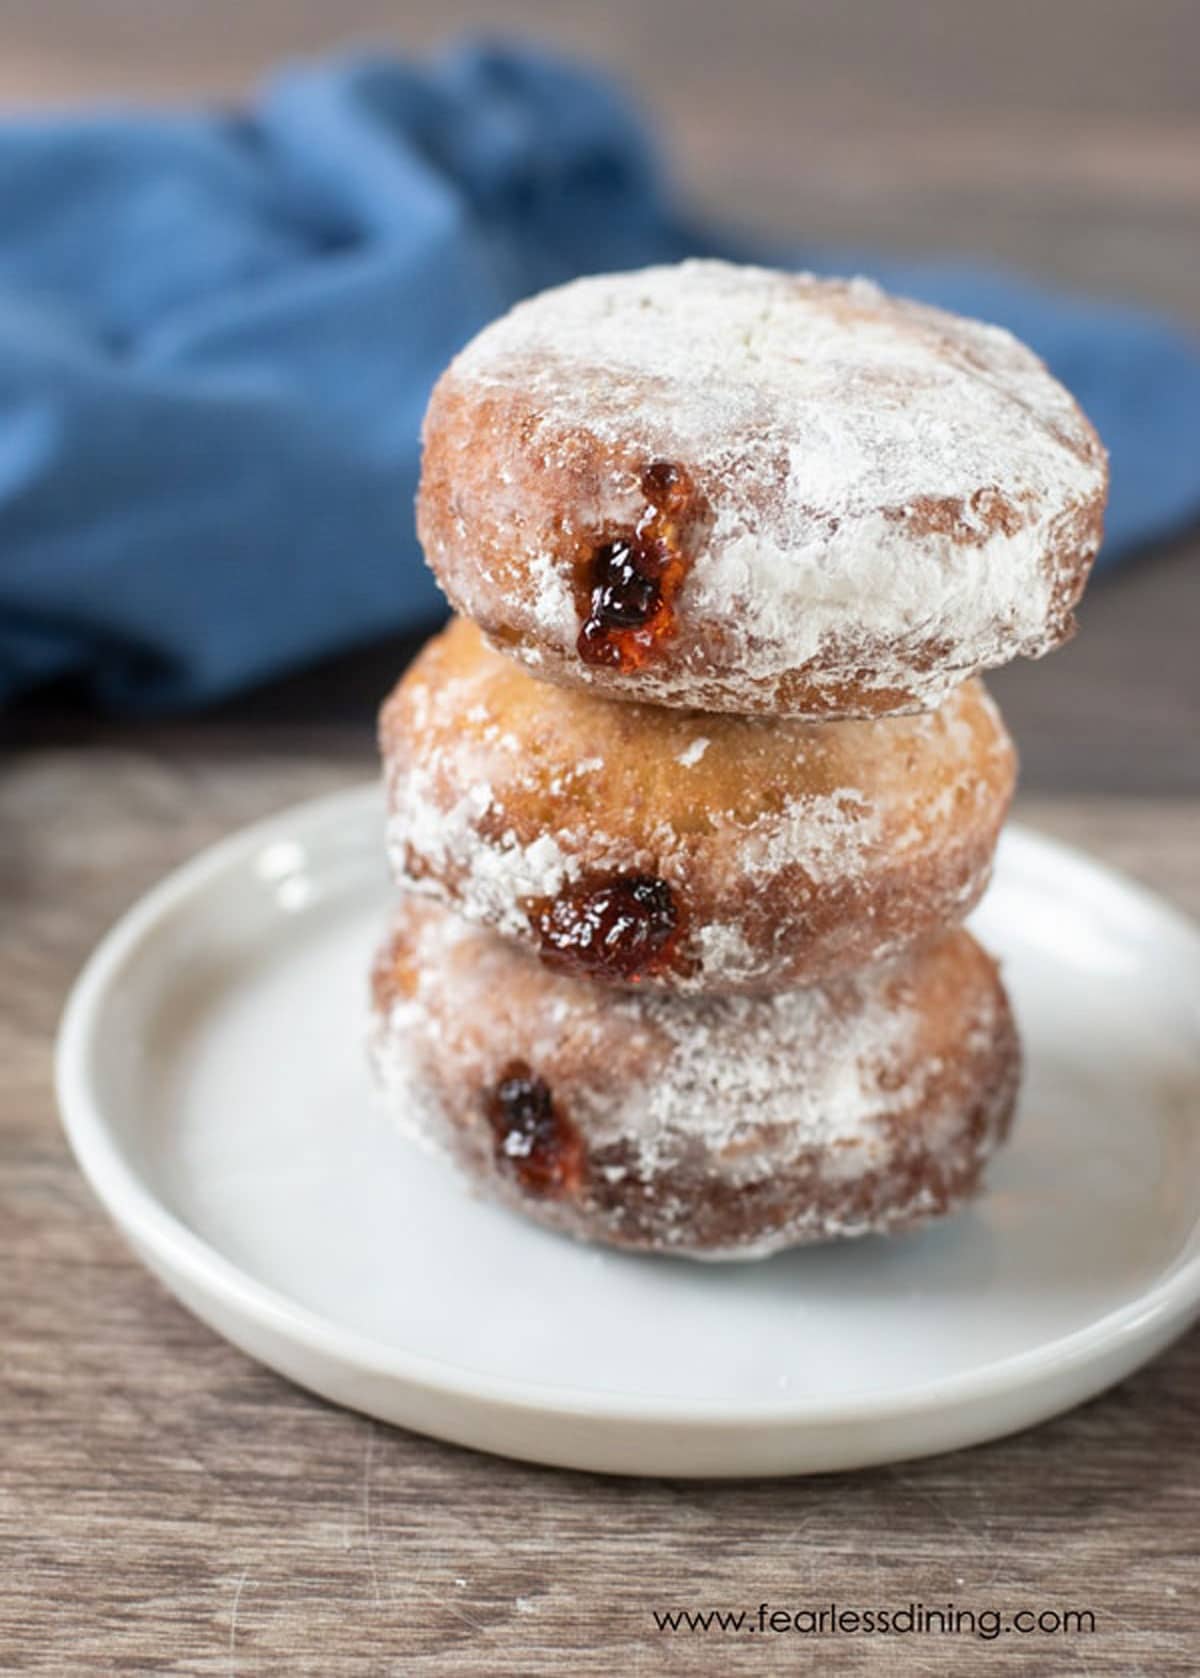 A stack of three jelly donuts on a plate.